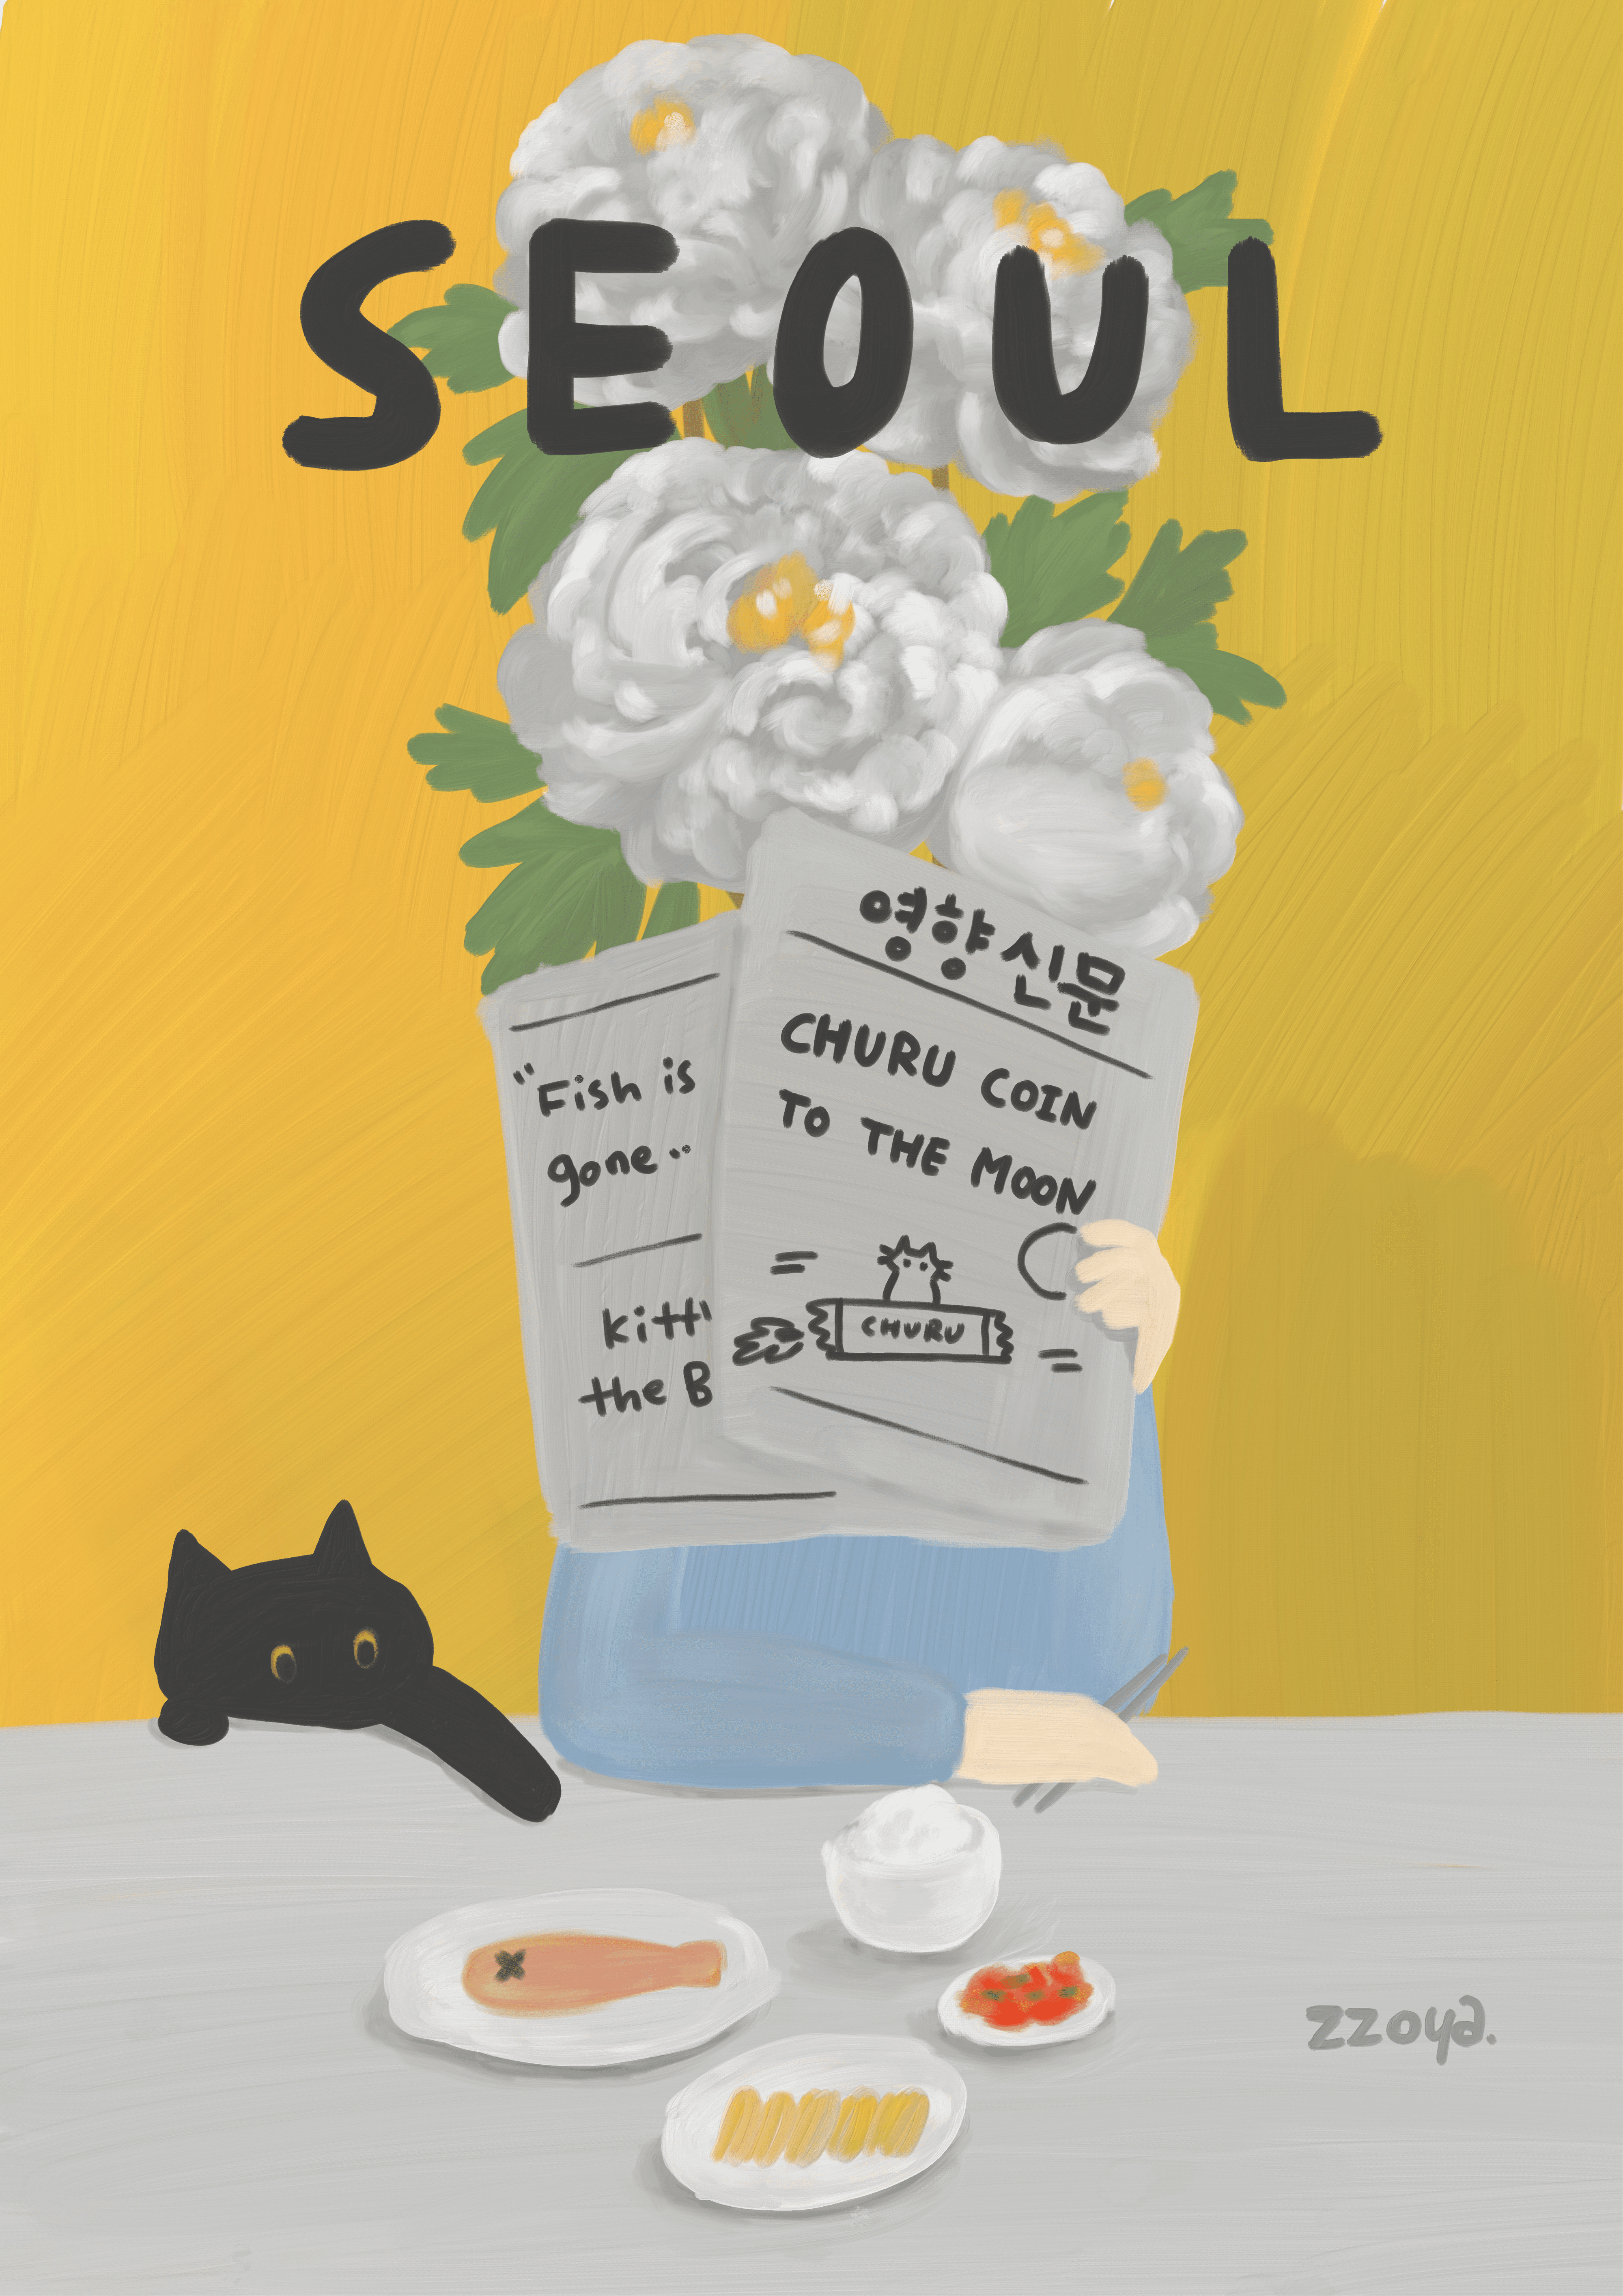 Everybody's daily life and cats : SEOUL